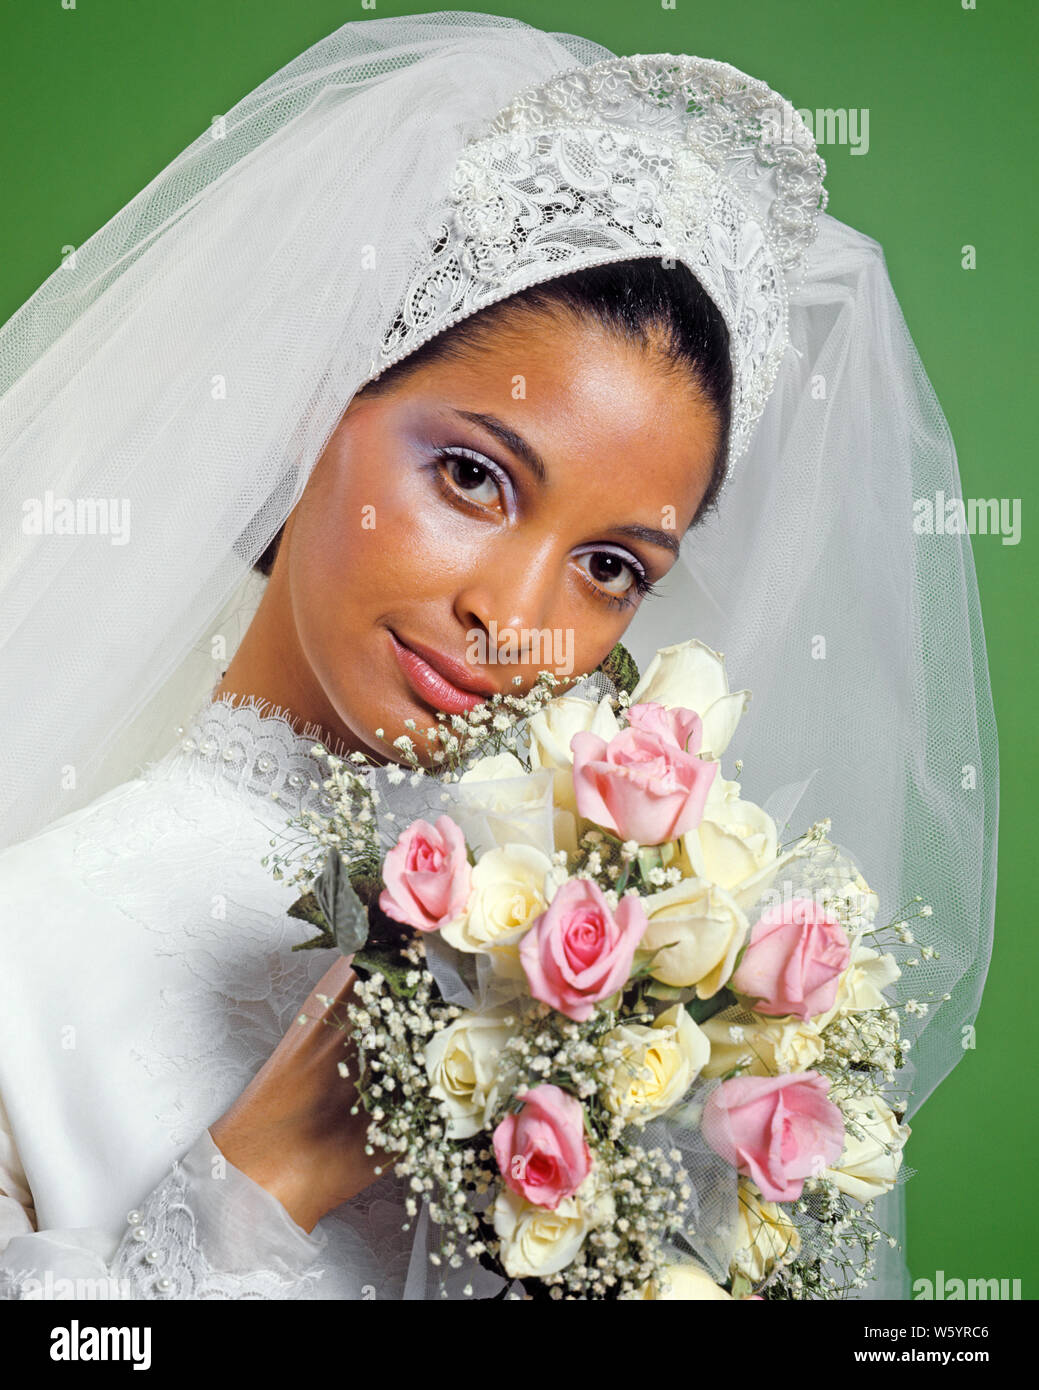 1970s PORTRAIT AFRICAN-AMERICAN BRIDE LACE HEADPIECE VEIL WHITE DRESS BOUQUET WHITE PINK ROSES BABY’S BREATH LOOKING AT CAMERA - kb8742 HAR001 HARS COPY SPACE LADIES MARRIAGE PERSONS VEIL BREATH CONFIDENCE CEREMONY BRIDAL EYE CONTACT DREAMS HAPPINESS HEAD AND SHOULDERS CHEERFUL BRIDES CUSTOM AFRICAN-AMERICANS AFRICAN-AMERICAN TRADITION NUPTIAL NUPTIALS OCCASION BLACK ETHNICITY MARRYING PRIDE SMILES HEADPIECE JOYFUL RITE OF PASSAGE STYLISH BABY'S WED MARRY MATRIMONY YOUNG ADULT WOMAN HAR001 OLD FASHIONED AFRICAN AMERICANS Stock Photo